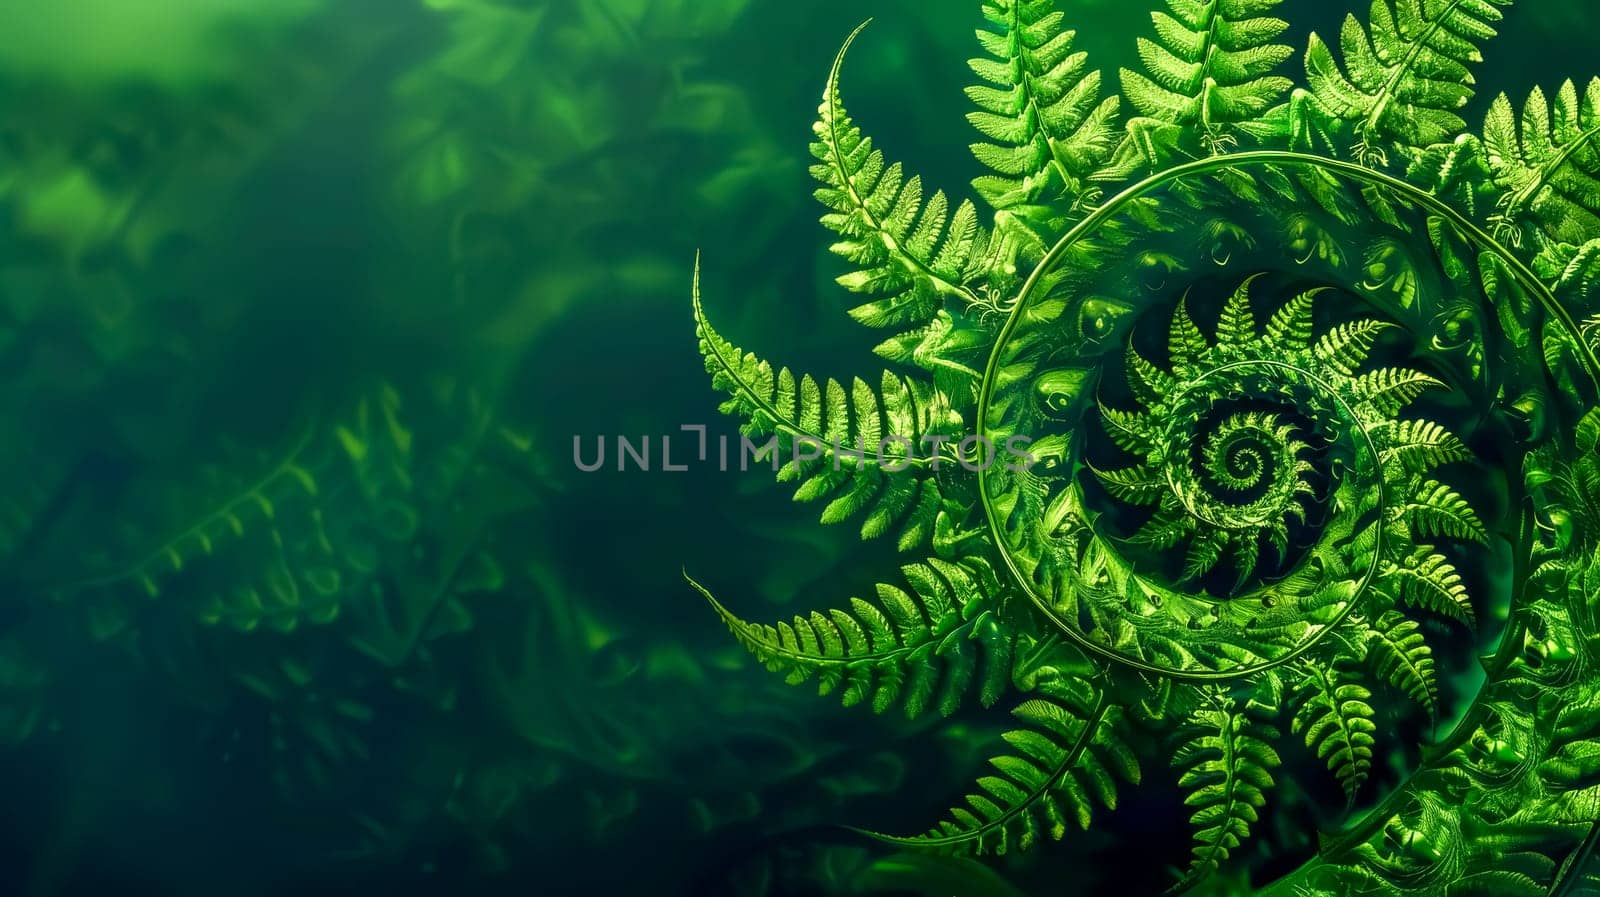 Lush green ferns with a natural fractal pattern, embodying the beauty of mathematical precision in flora